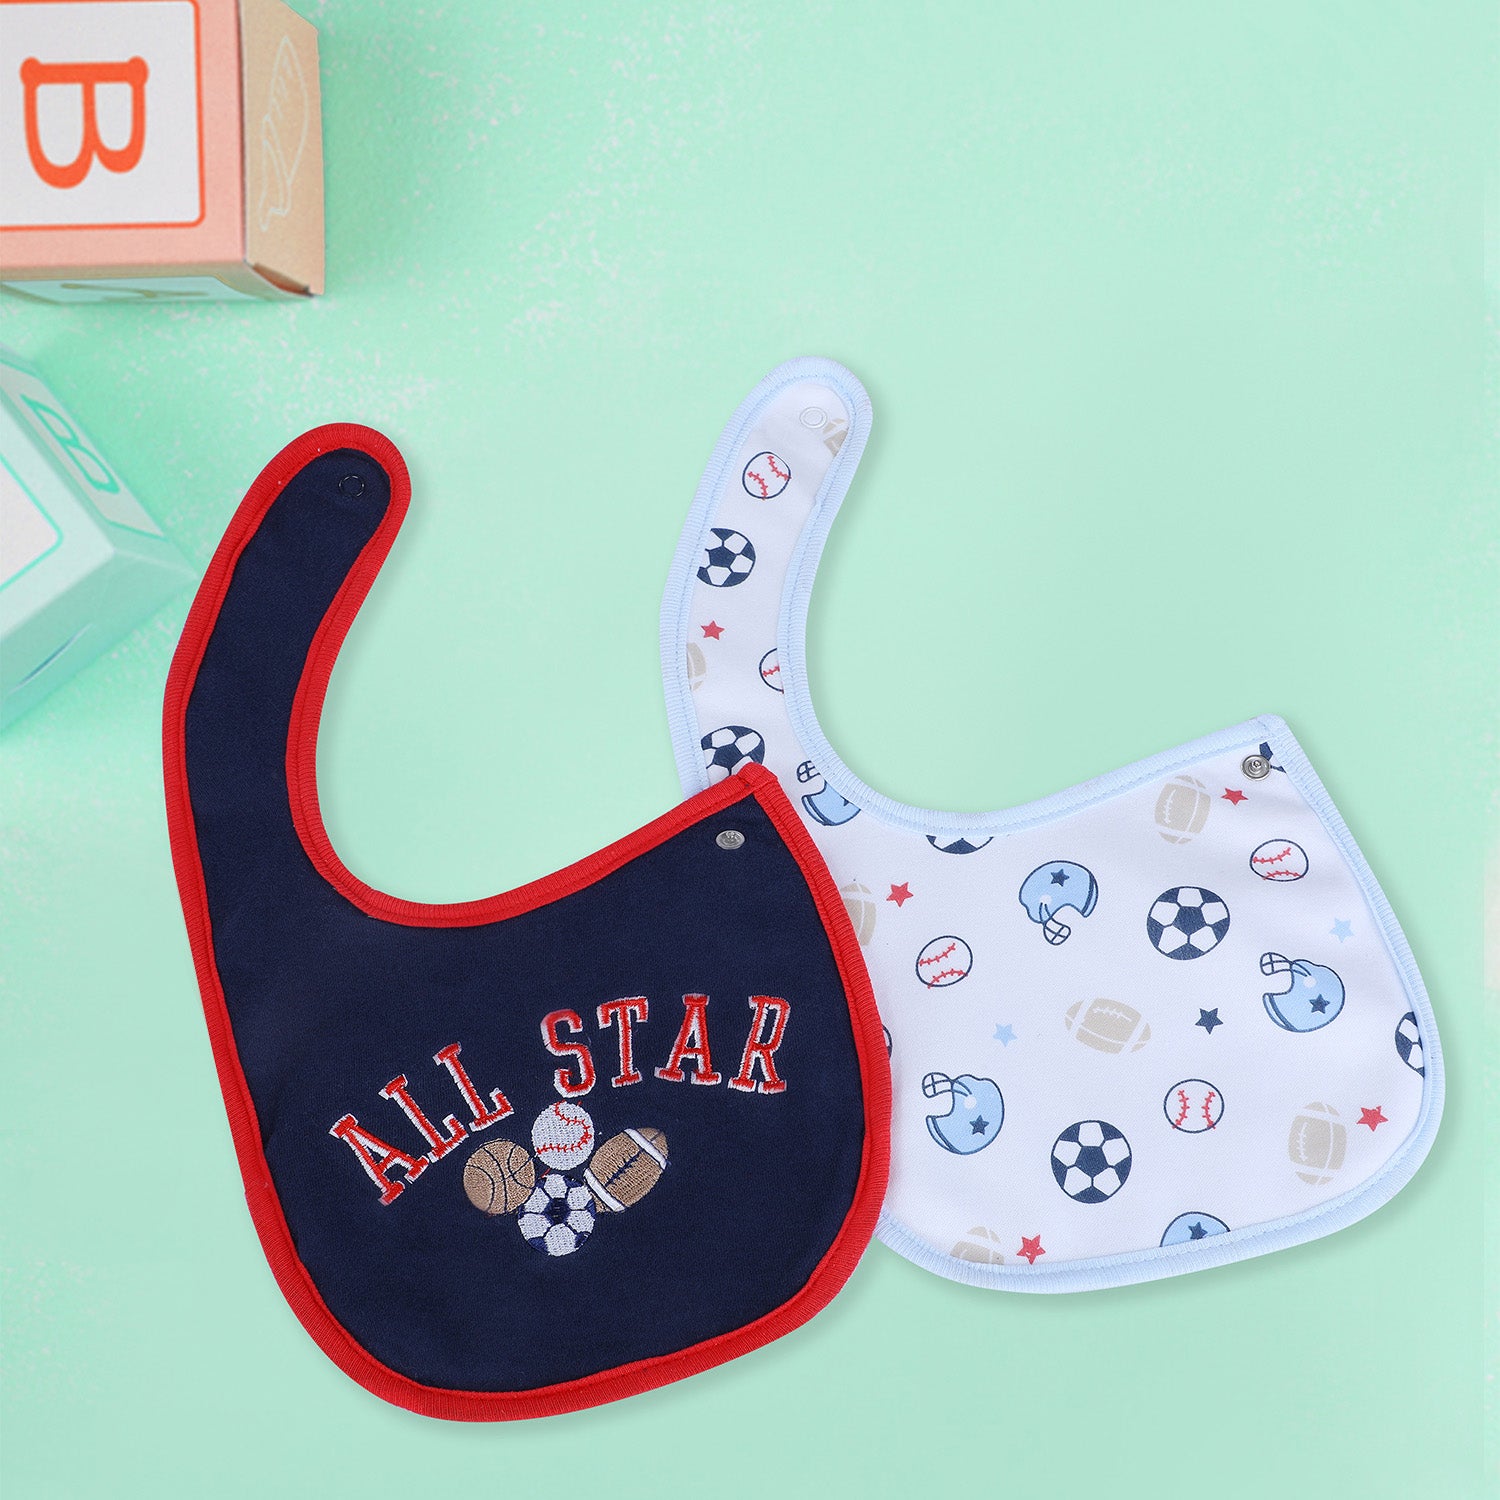 Baby Moo Sporty Star Cotton 2 Pack Buttoned Feeding Bibs - Navy Blue - Baby Moo